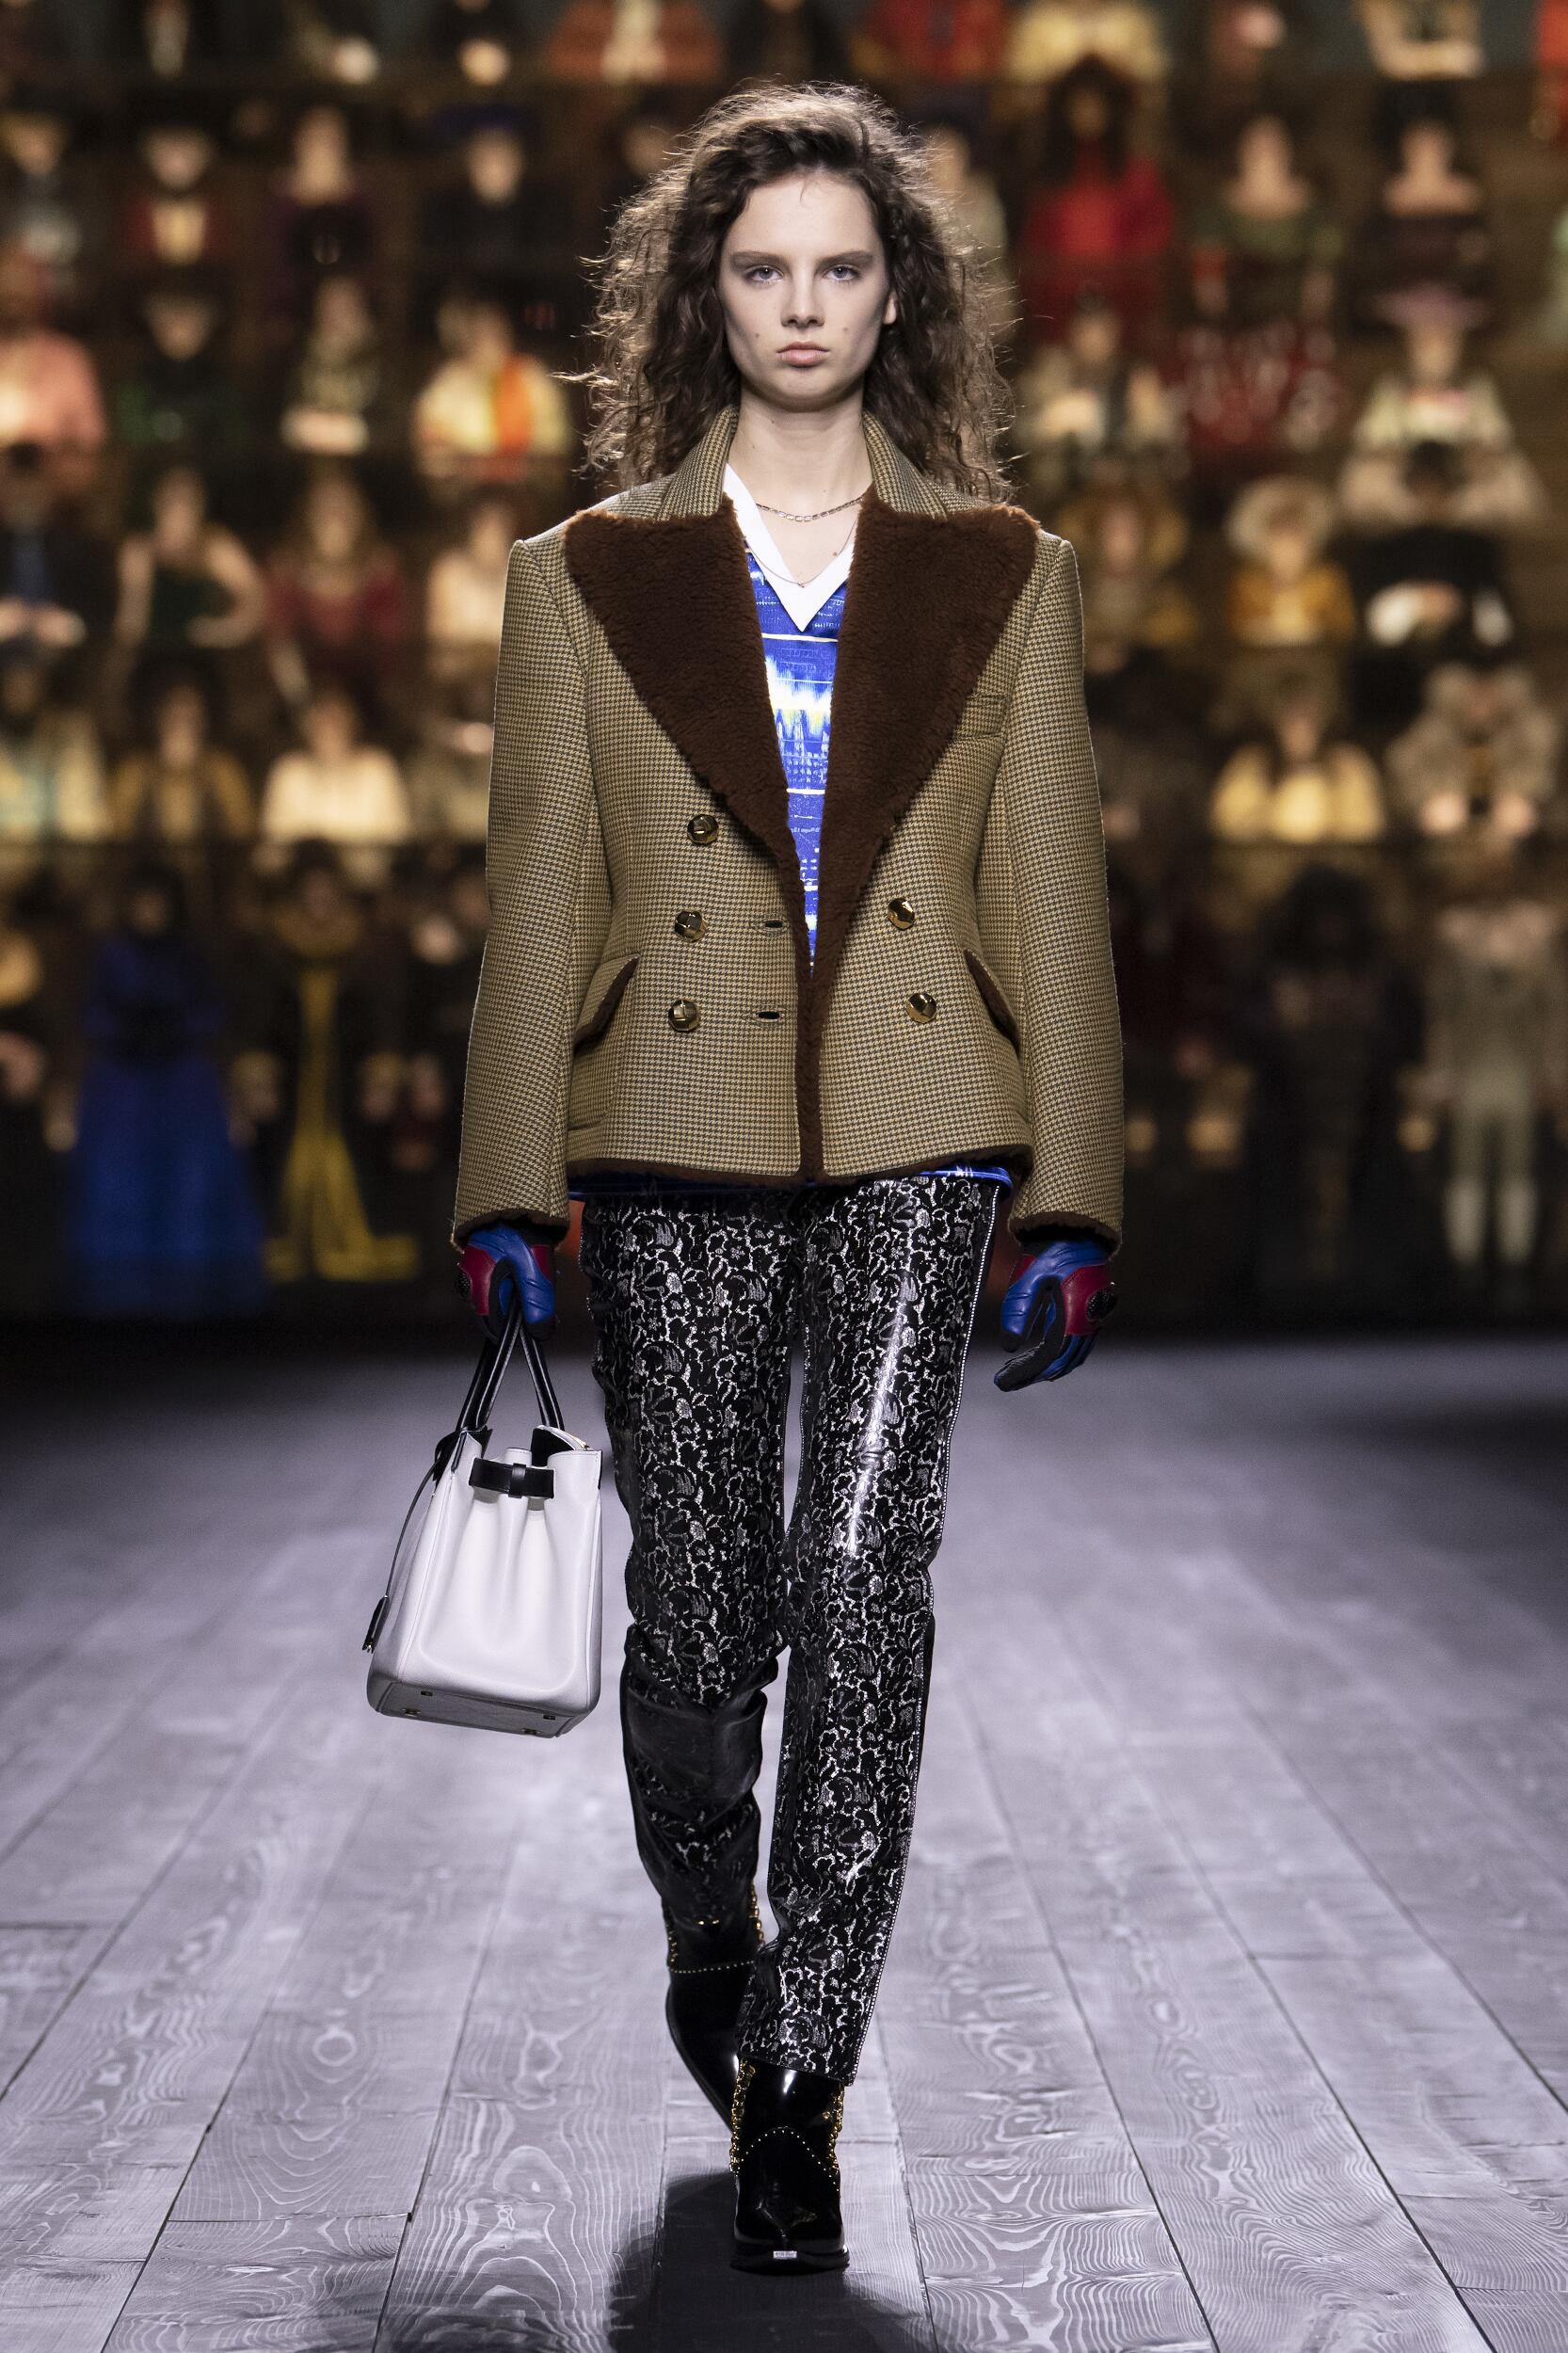 LOUIS VUITTON FALL WINTER 2020 WOMEN'S COLLECTION | The Skinny Beep